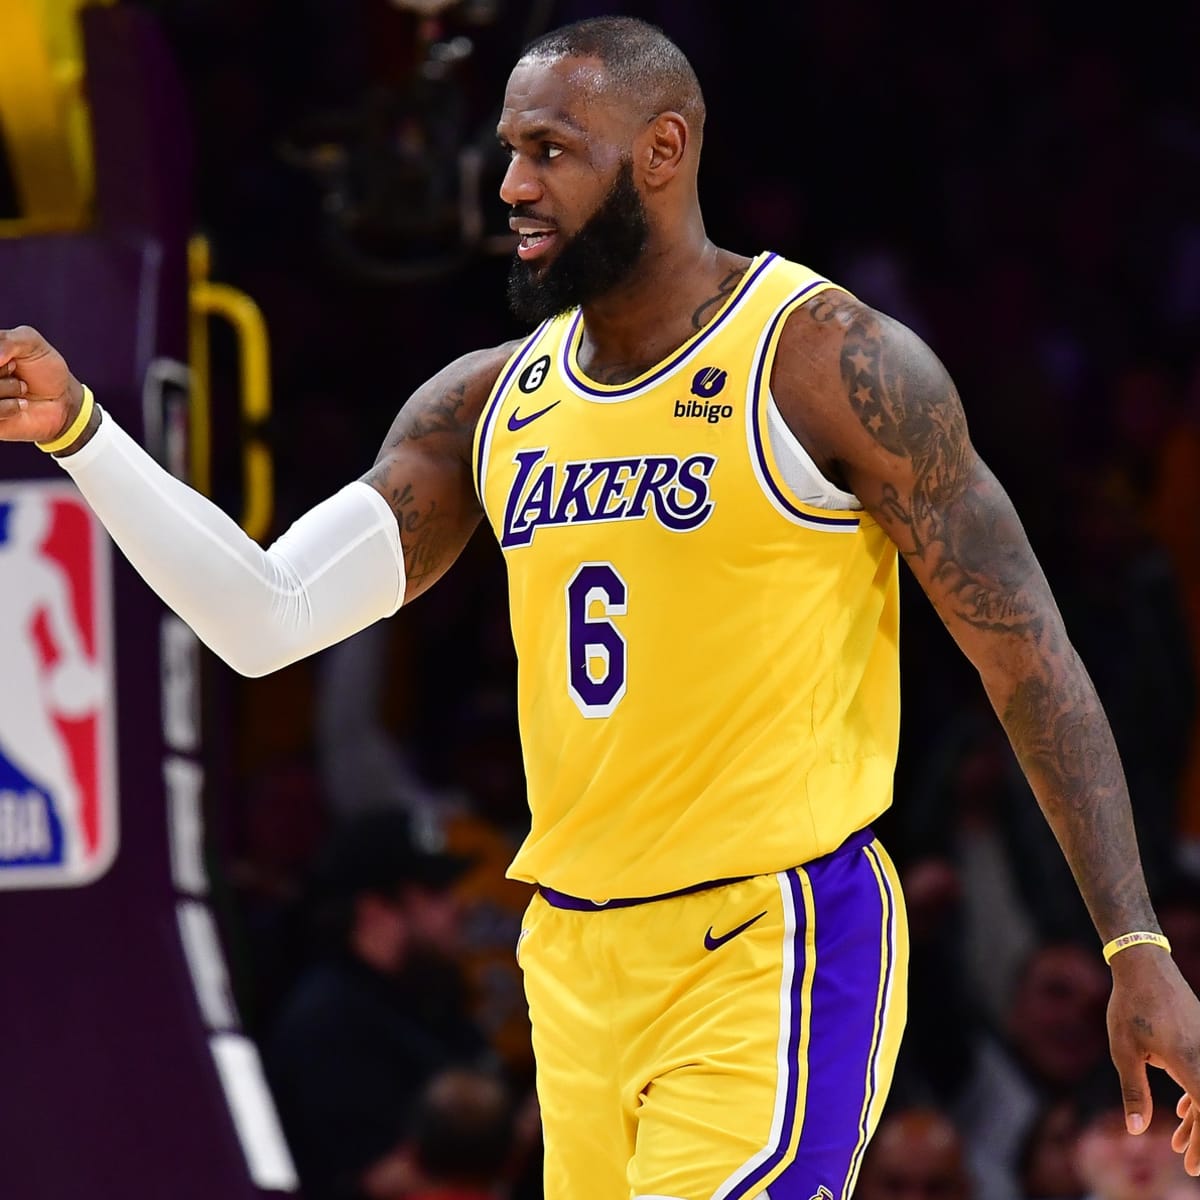 LeBron savors new route to Finals as Lakers' wait ends